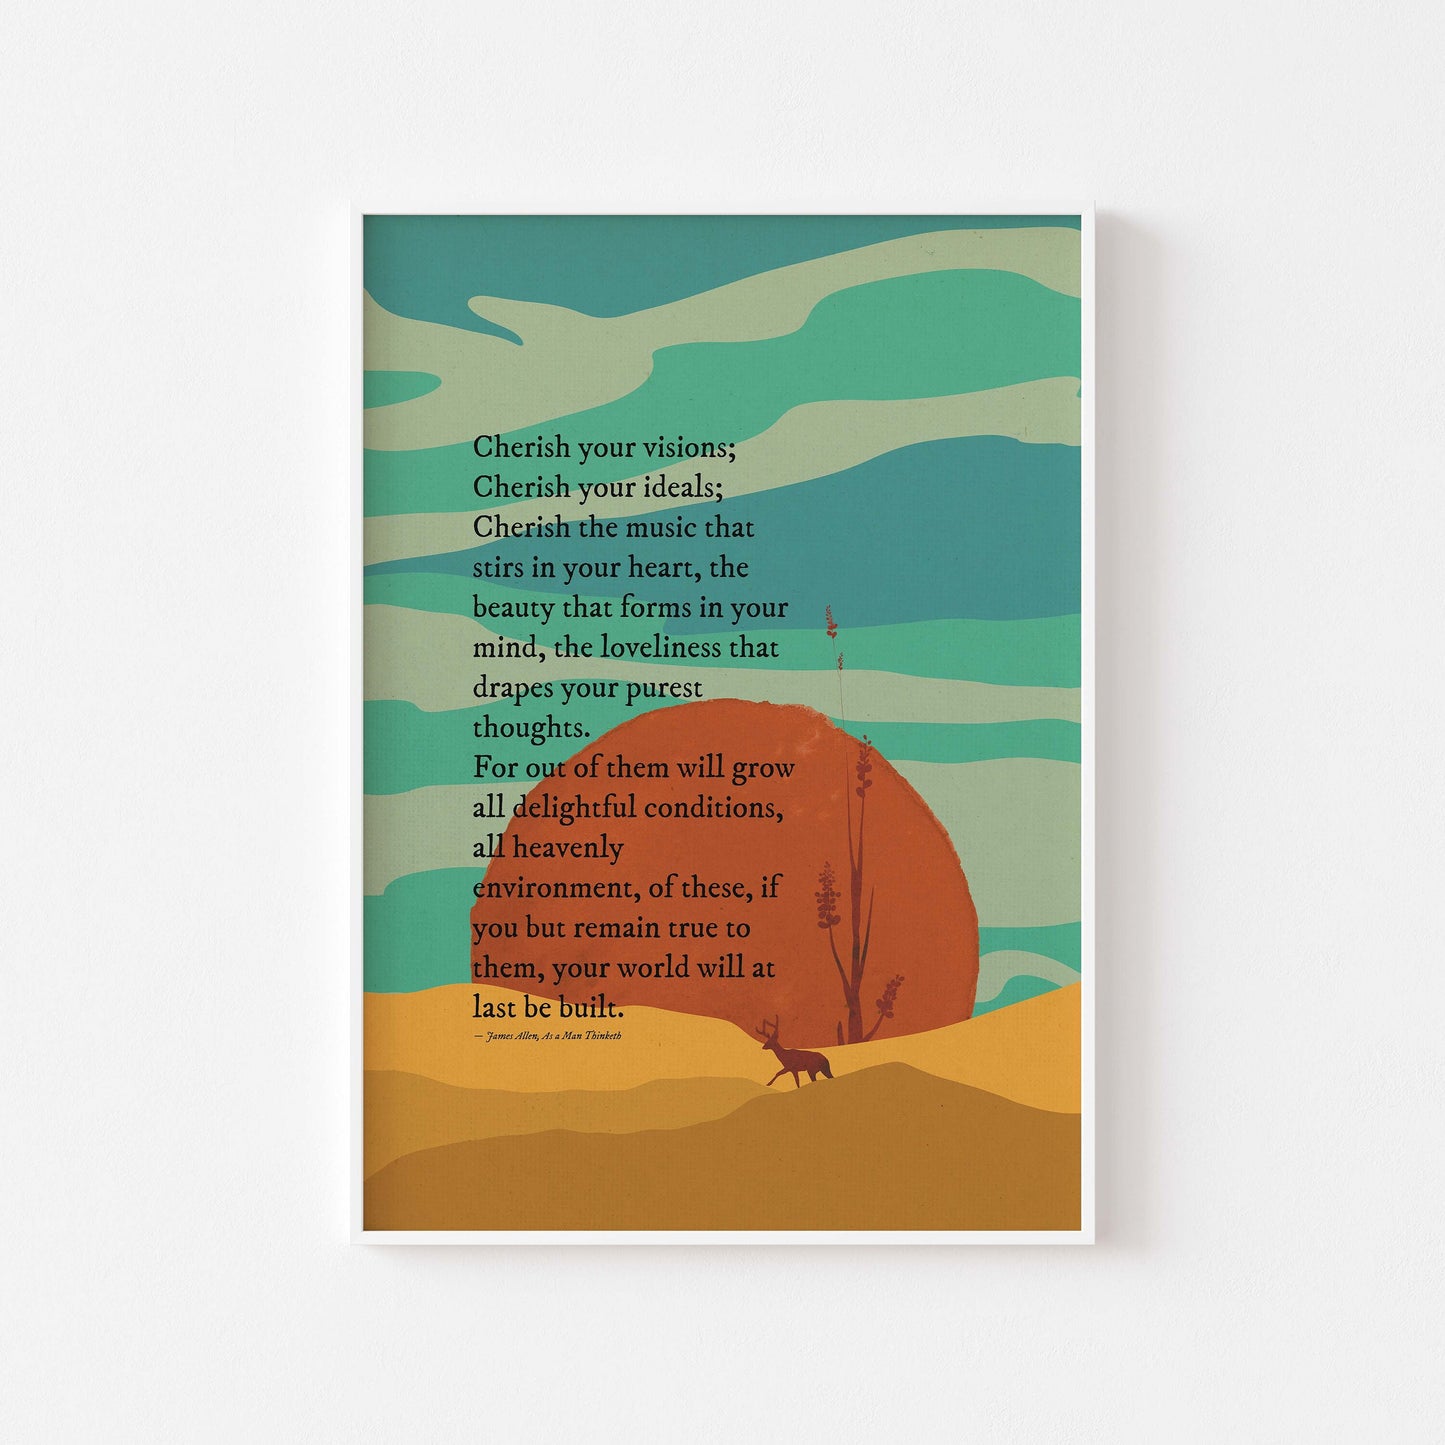 Cherish your vision by james allen from As a Man Thinketh with a colorful scenic illustration in orange, blue, yellow & black in white frame mockup